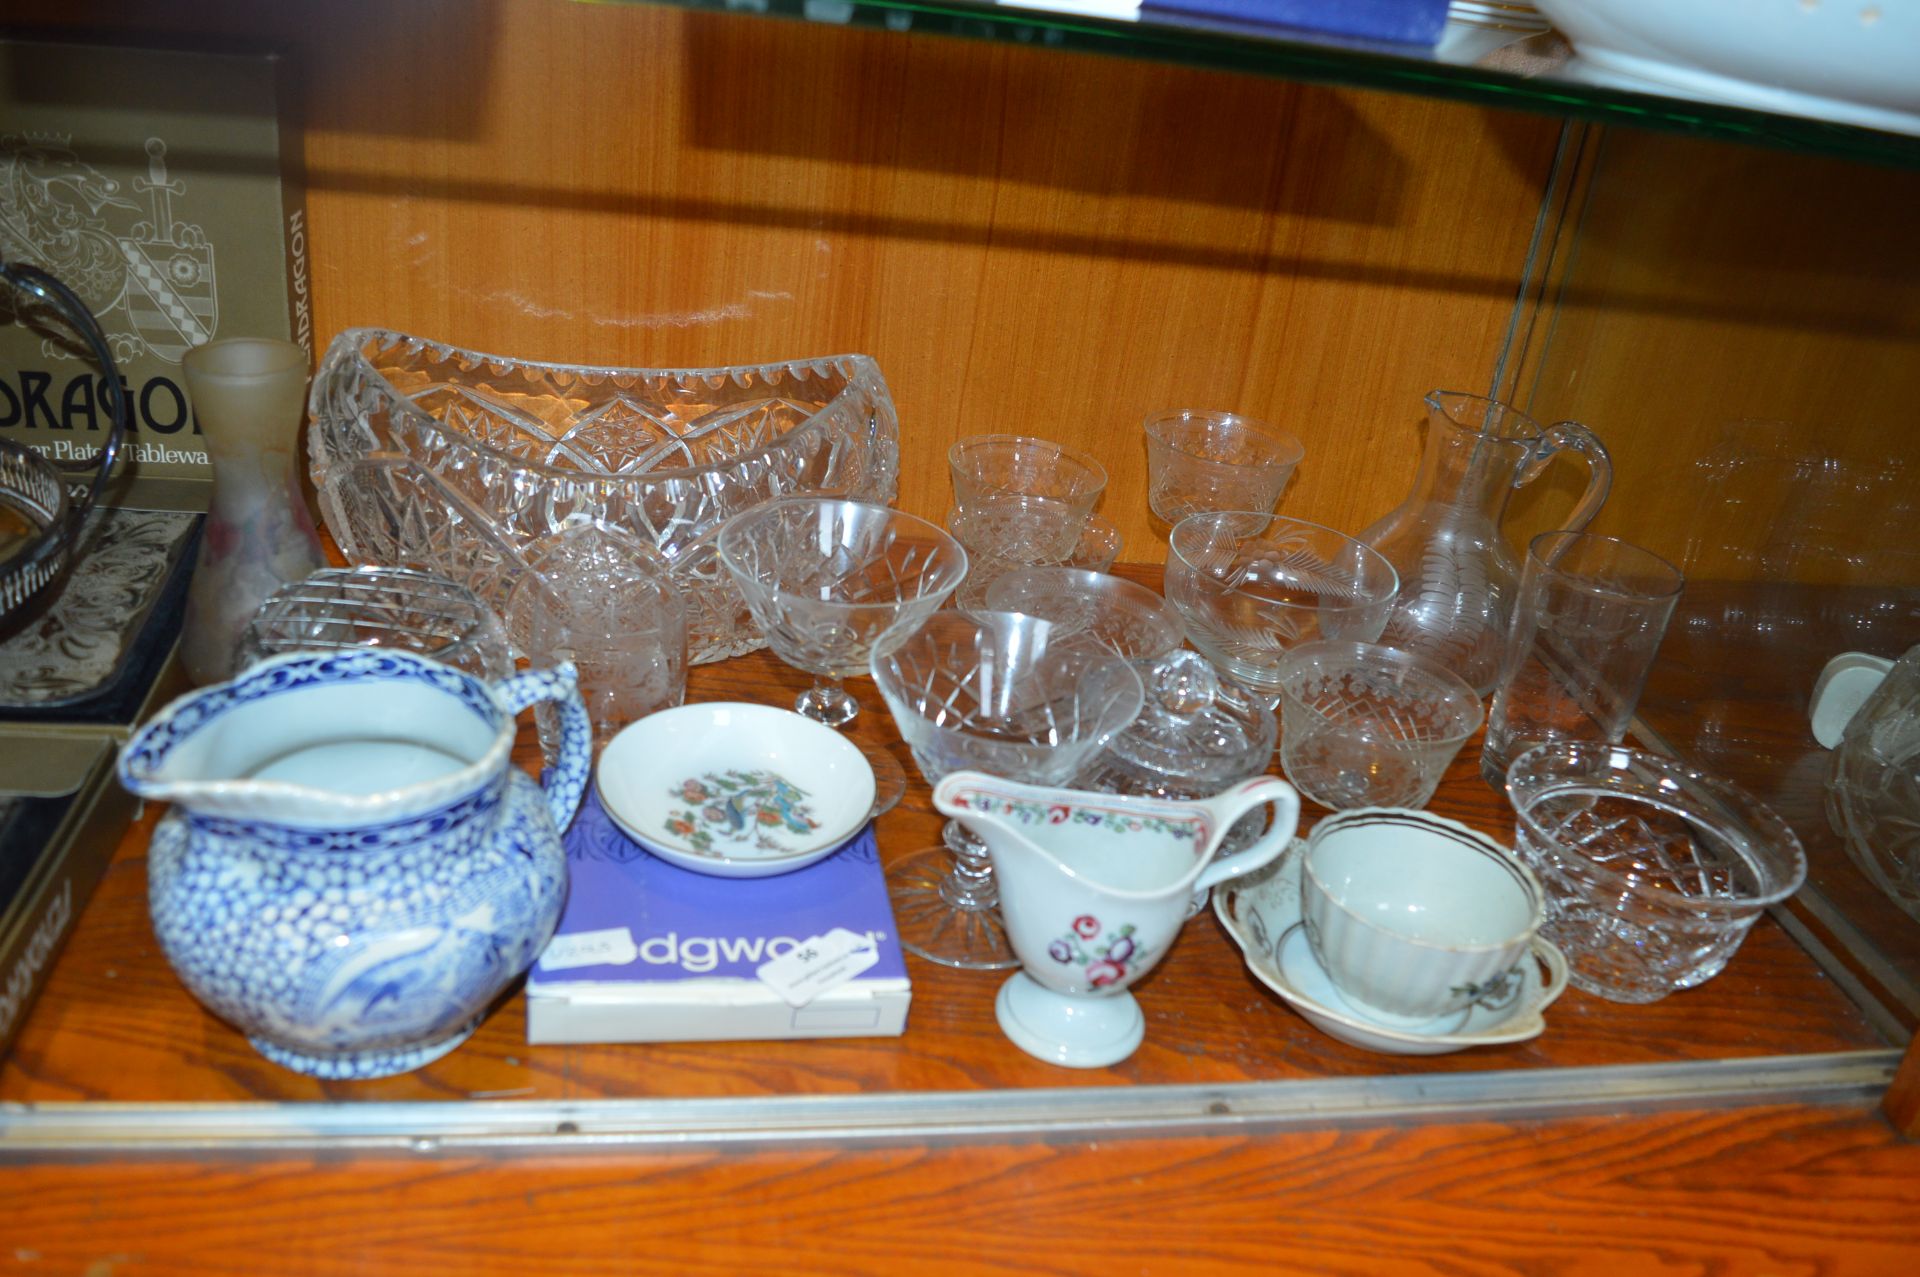 Cut Crystal Dishes, Bowls, plus Pottery Jugs, etc.